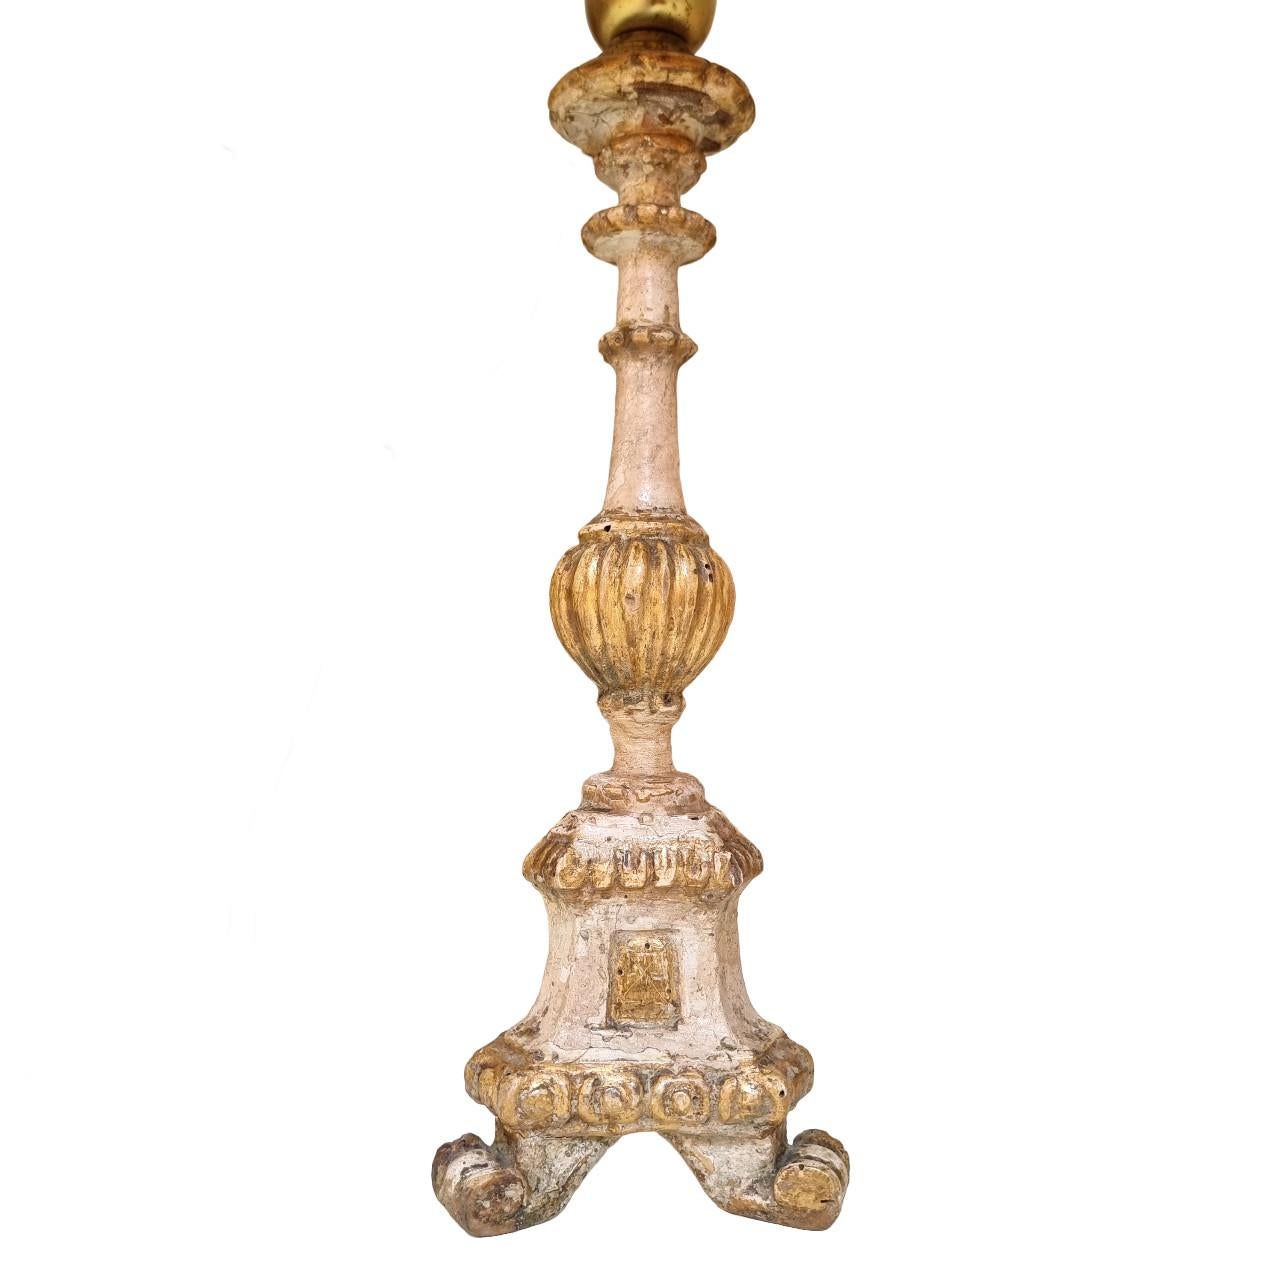 This is an absolutely fabulous pair of Italian carved wood candlesticks converted to table lamps, early 19th century, painted with ivory lacquer and finished with original gold leaf gilding.
Each candlestick stands on a tripod base ending with